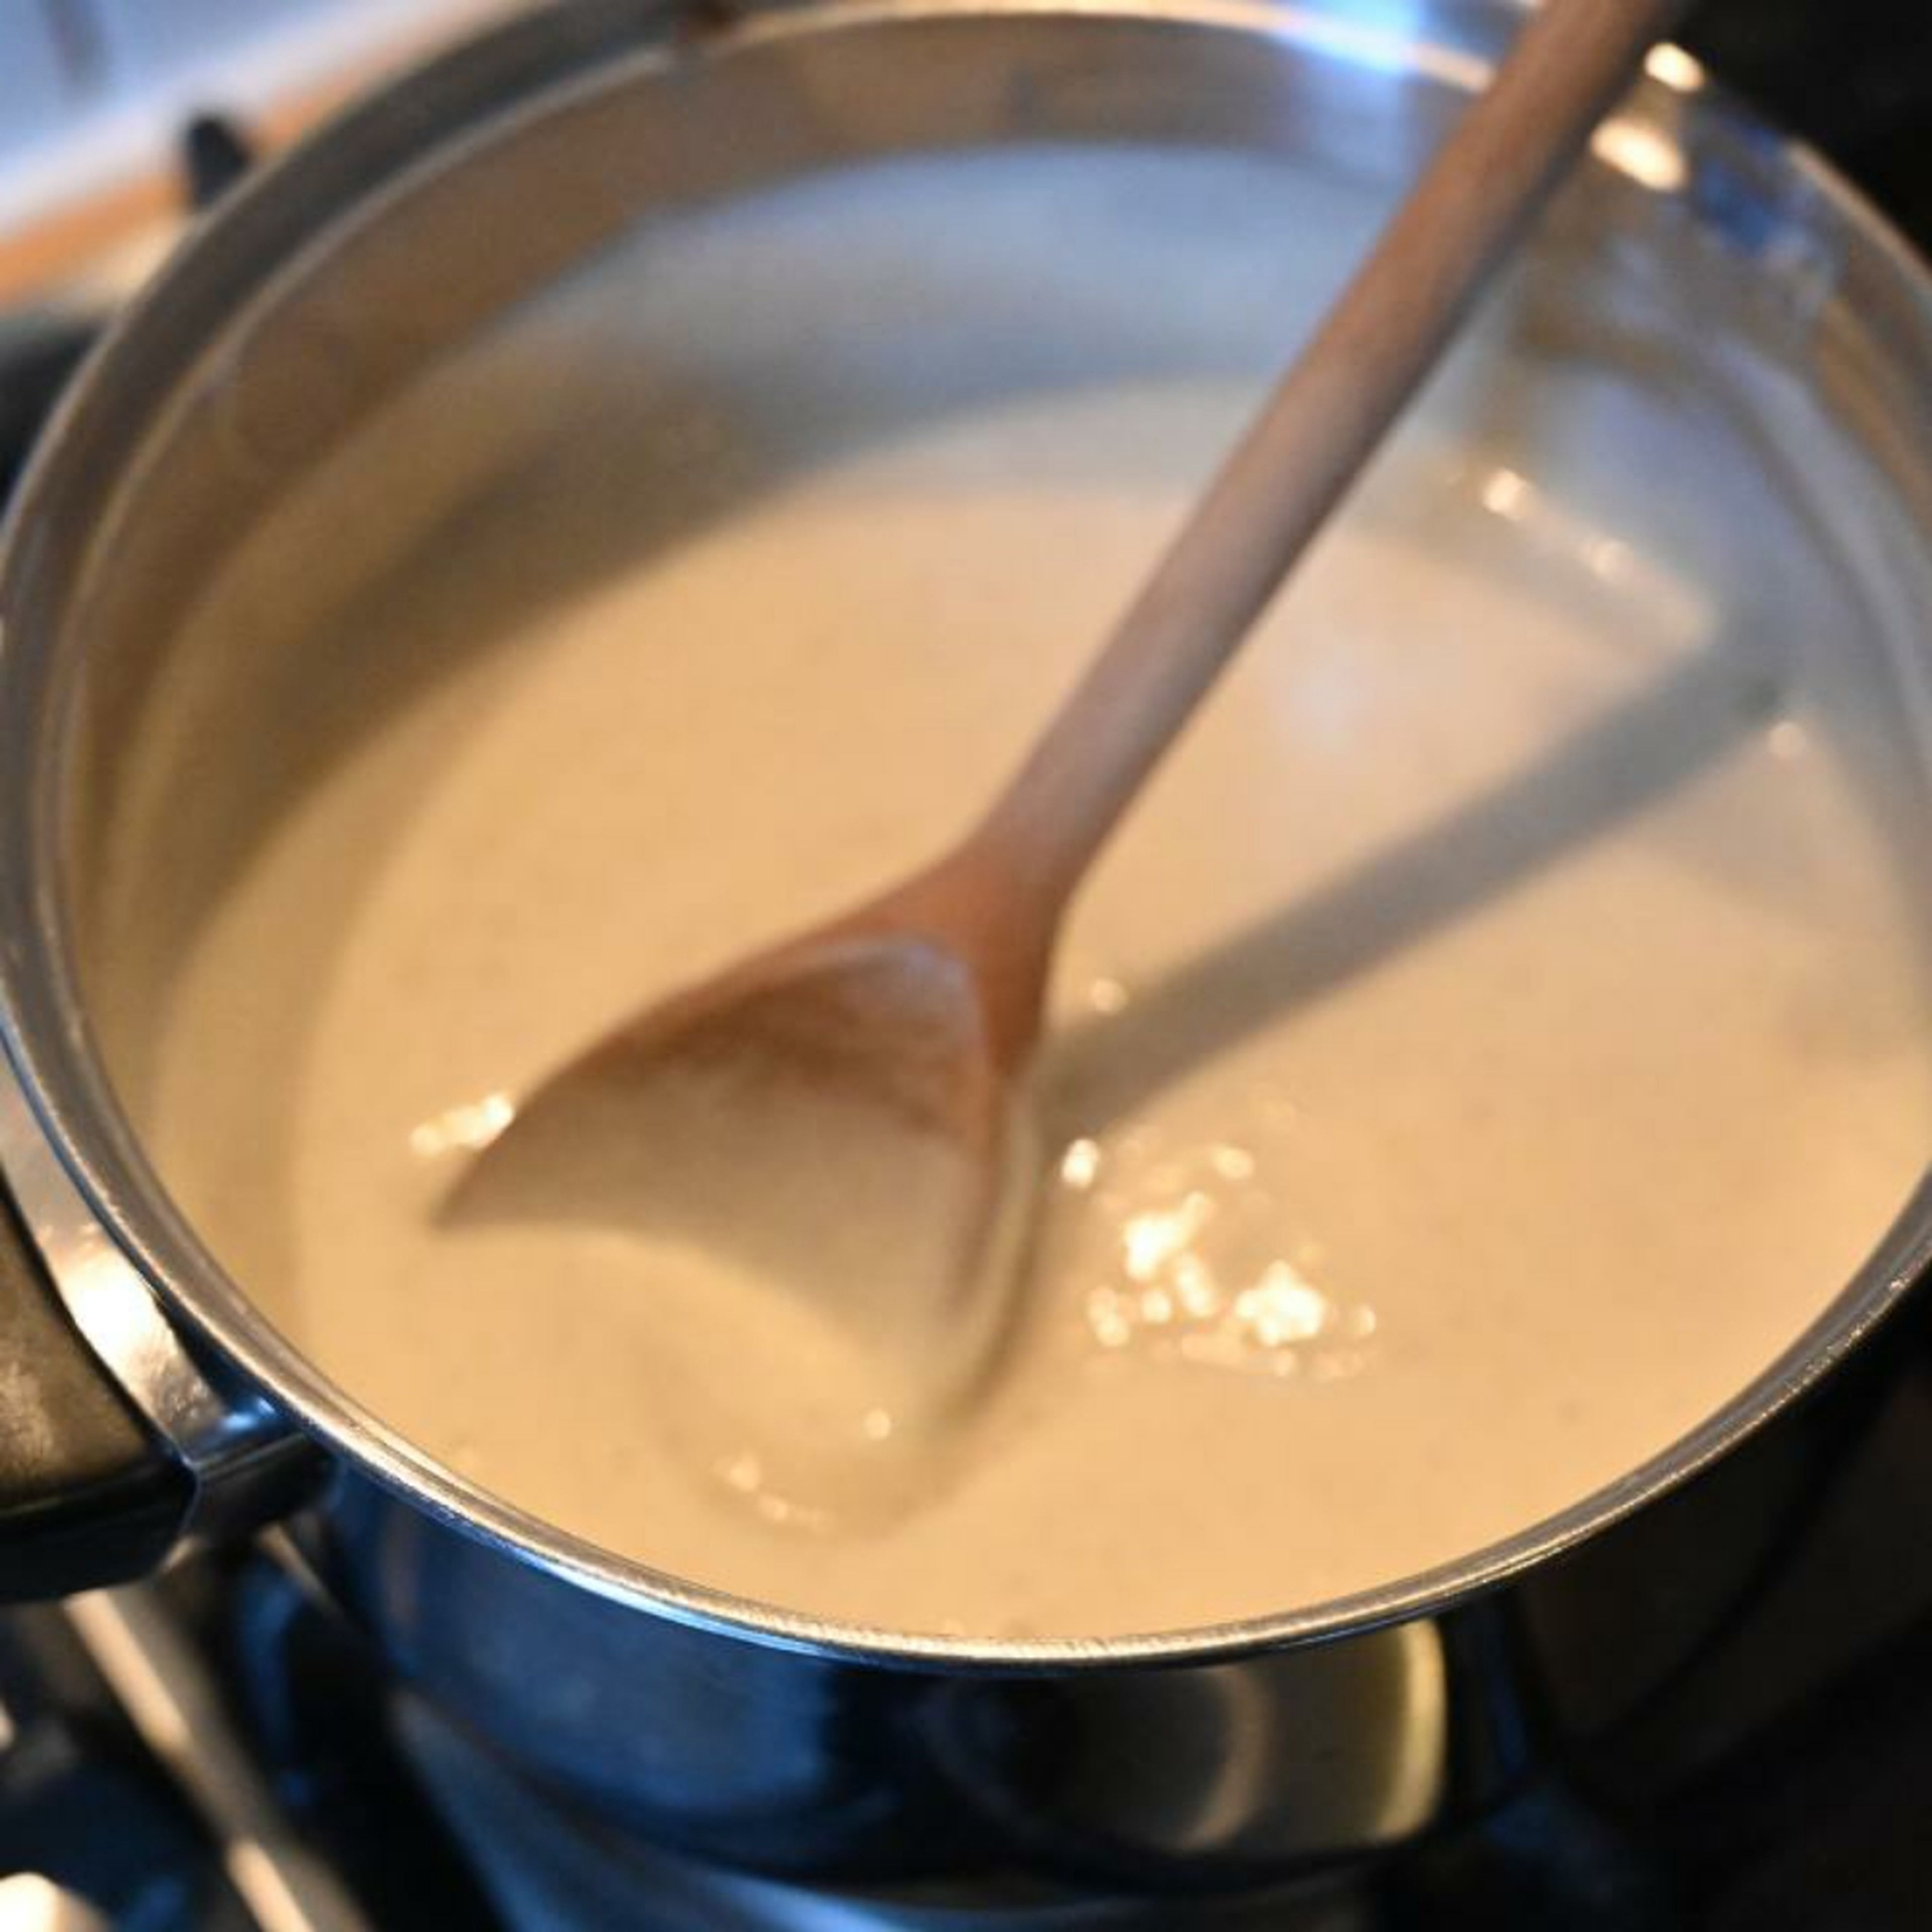 Pour the custard mixture back into the pan and cook on low heat for 10 minutes.